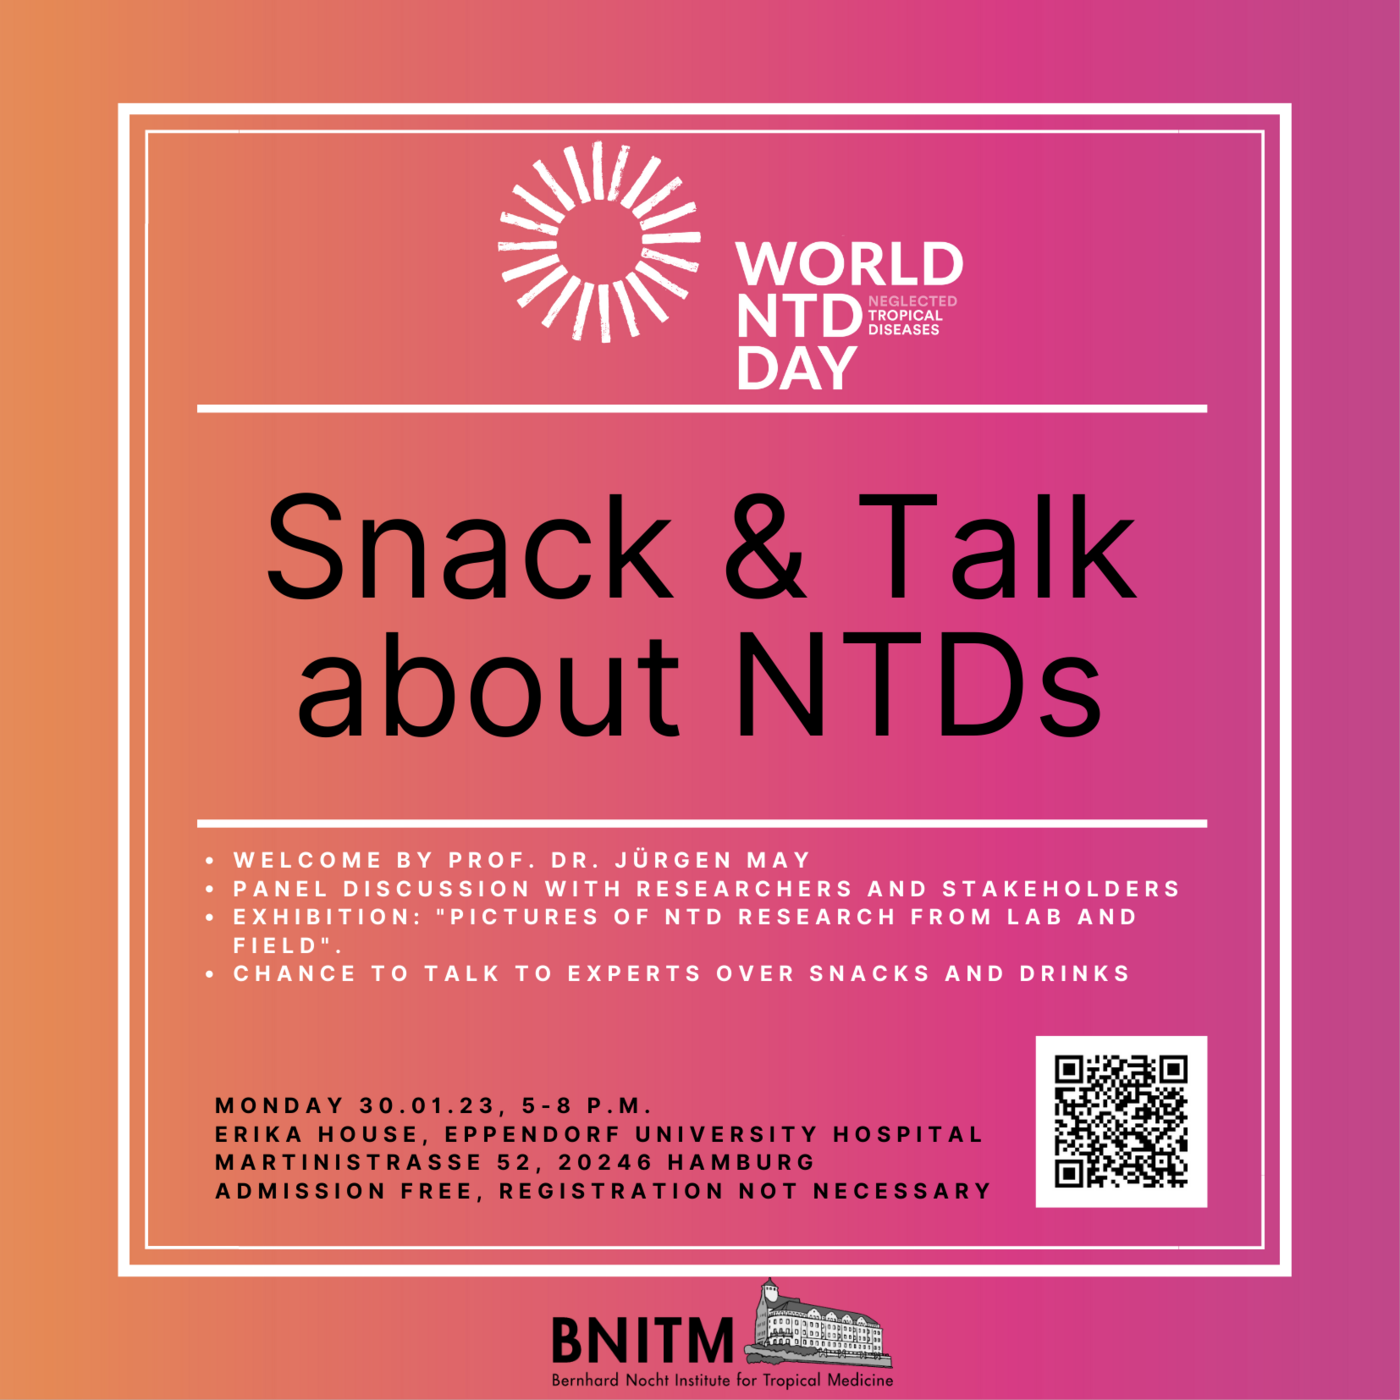 The orange-pink tile invites you to the event "Snack & Talk about NTDs" on 30 January 2023 at 5 pm at the Erika Haus of the University Medical Center Hamburg-Eppendorf.